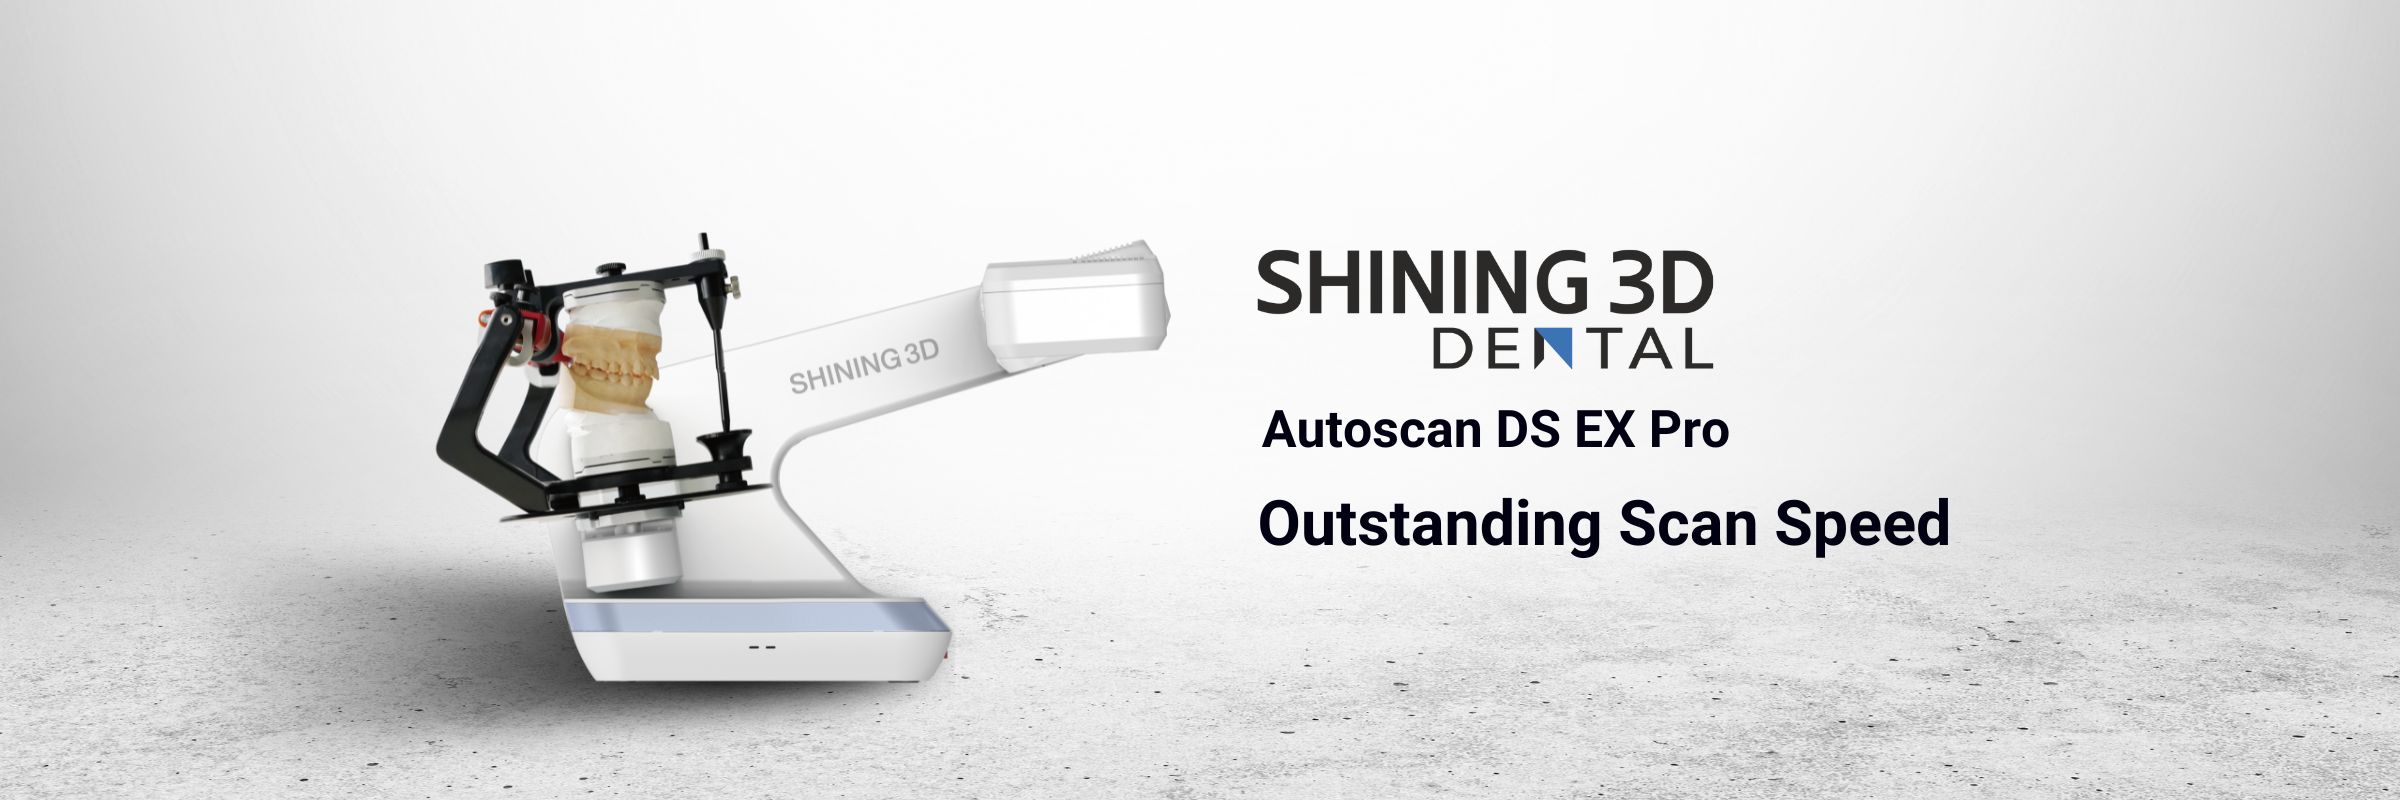 Shinning 3D Autoscan DS EX Pro Product Page Banner